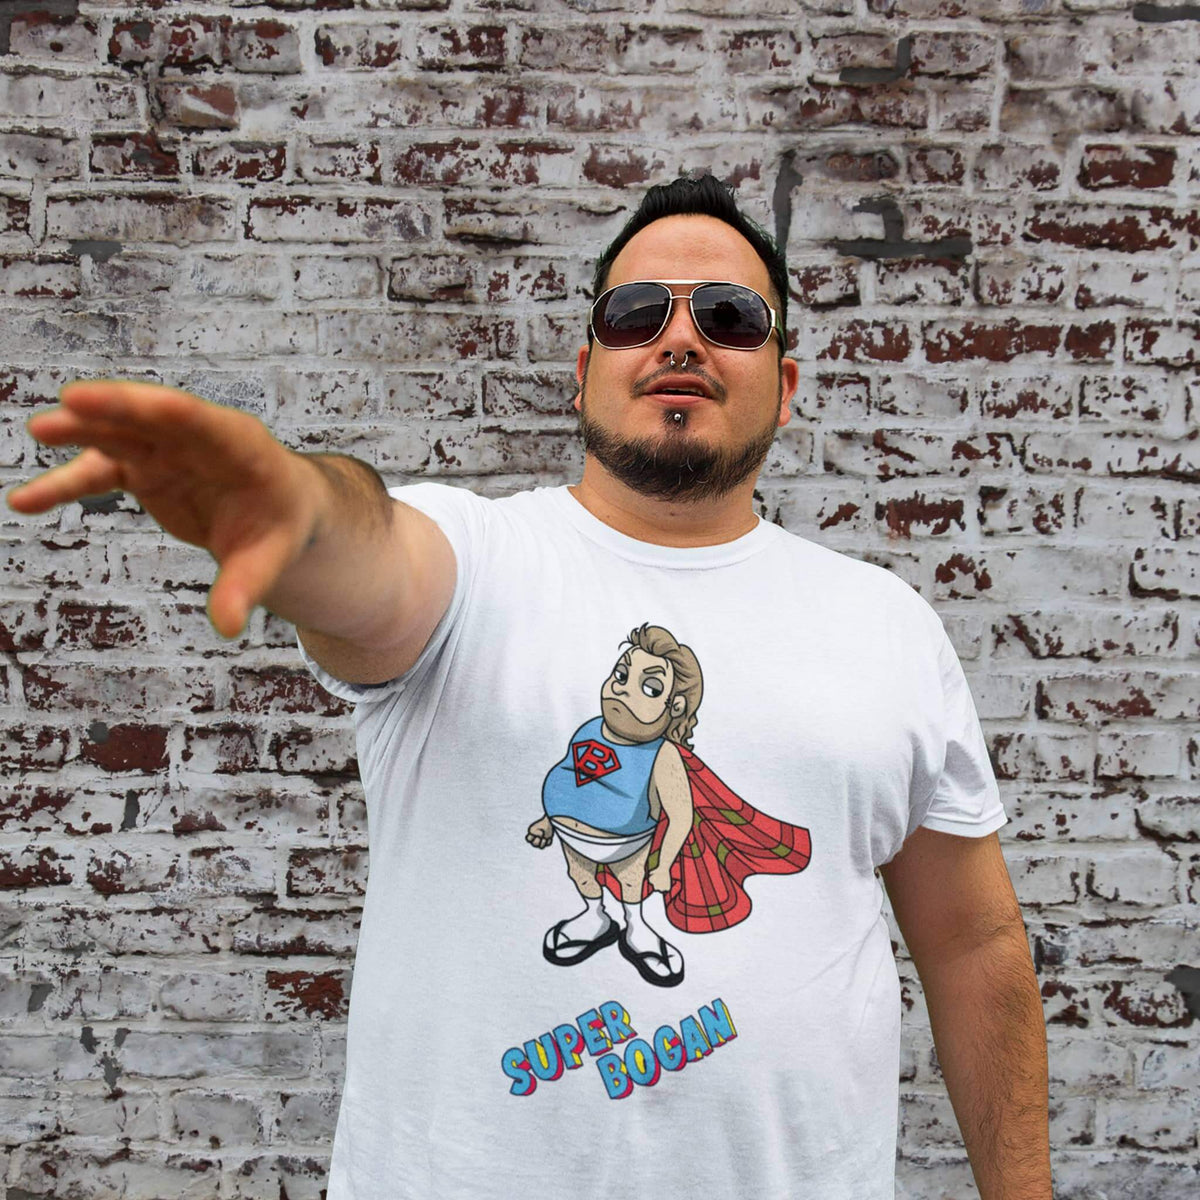 Large man wearing white t shirt with Super Bogan character graphic design